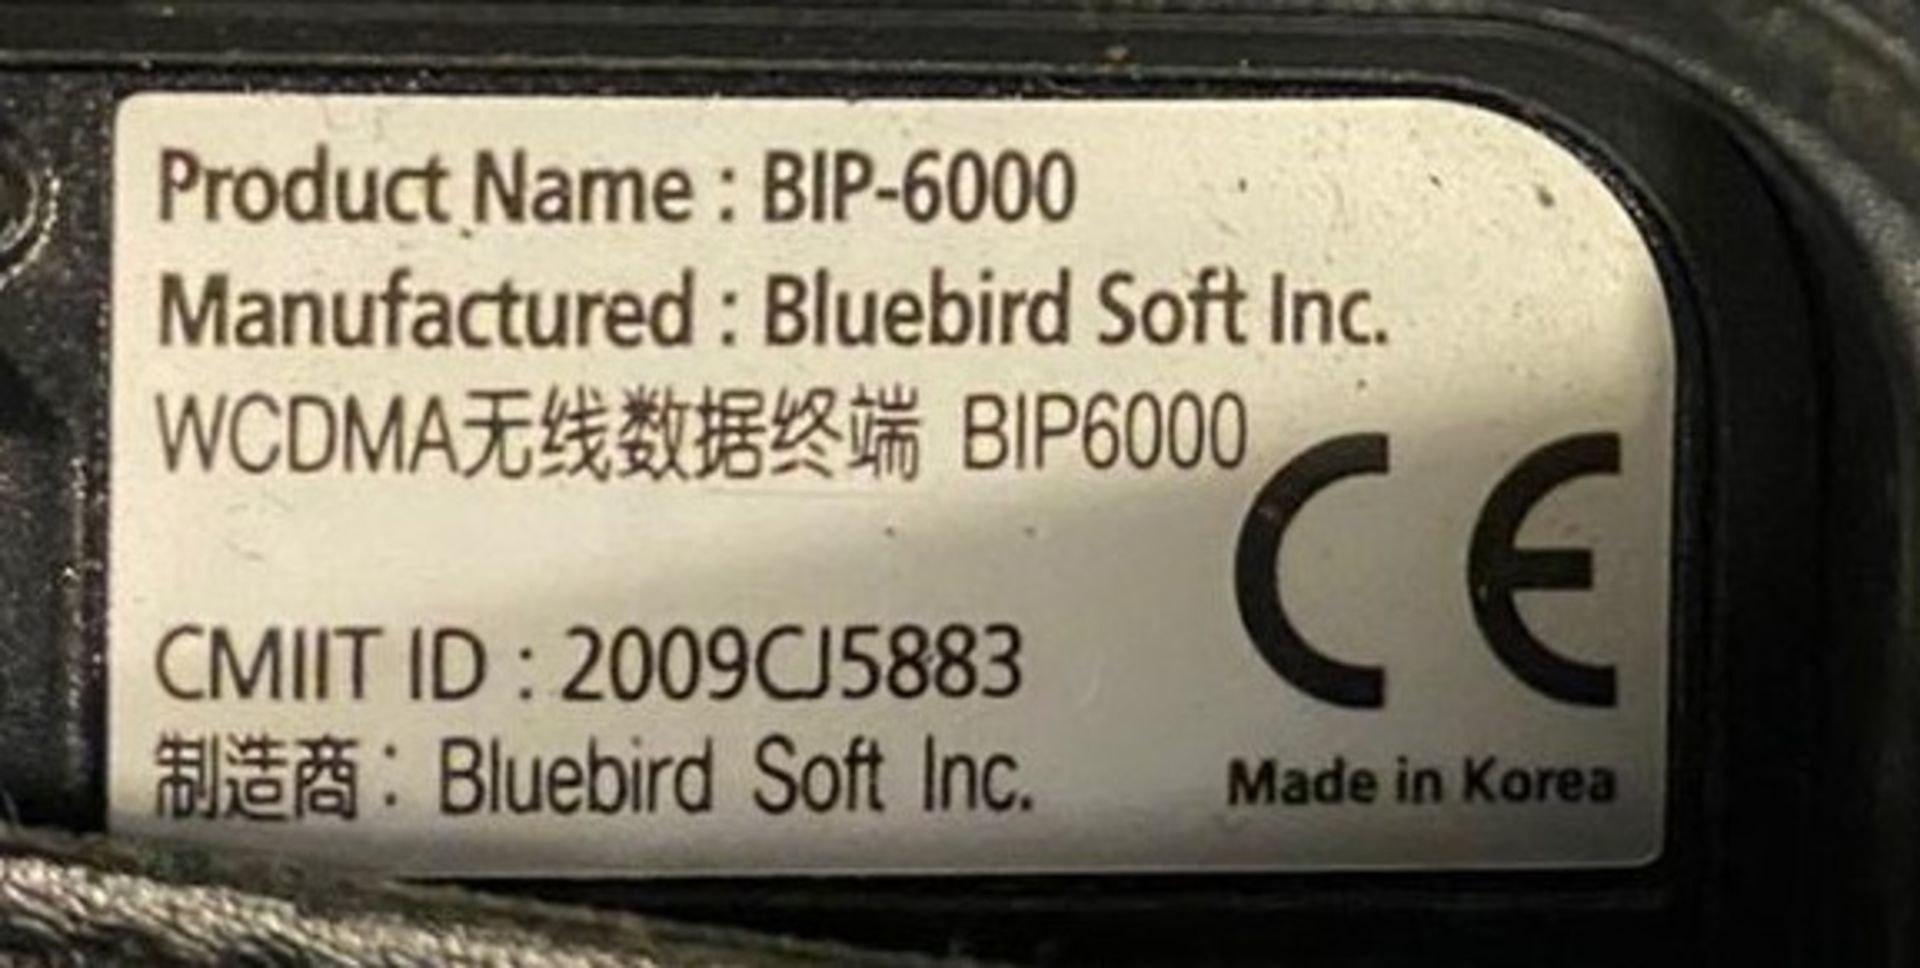 4 x Pidion BIP-6000 Mobile Handheld Computer With Barcode Scanning Capability - Used Condition - - Image 3 of 5